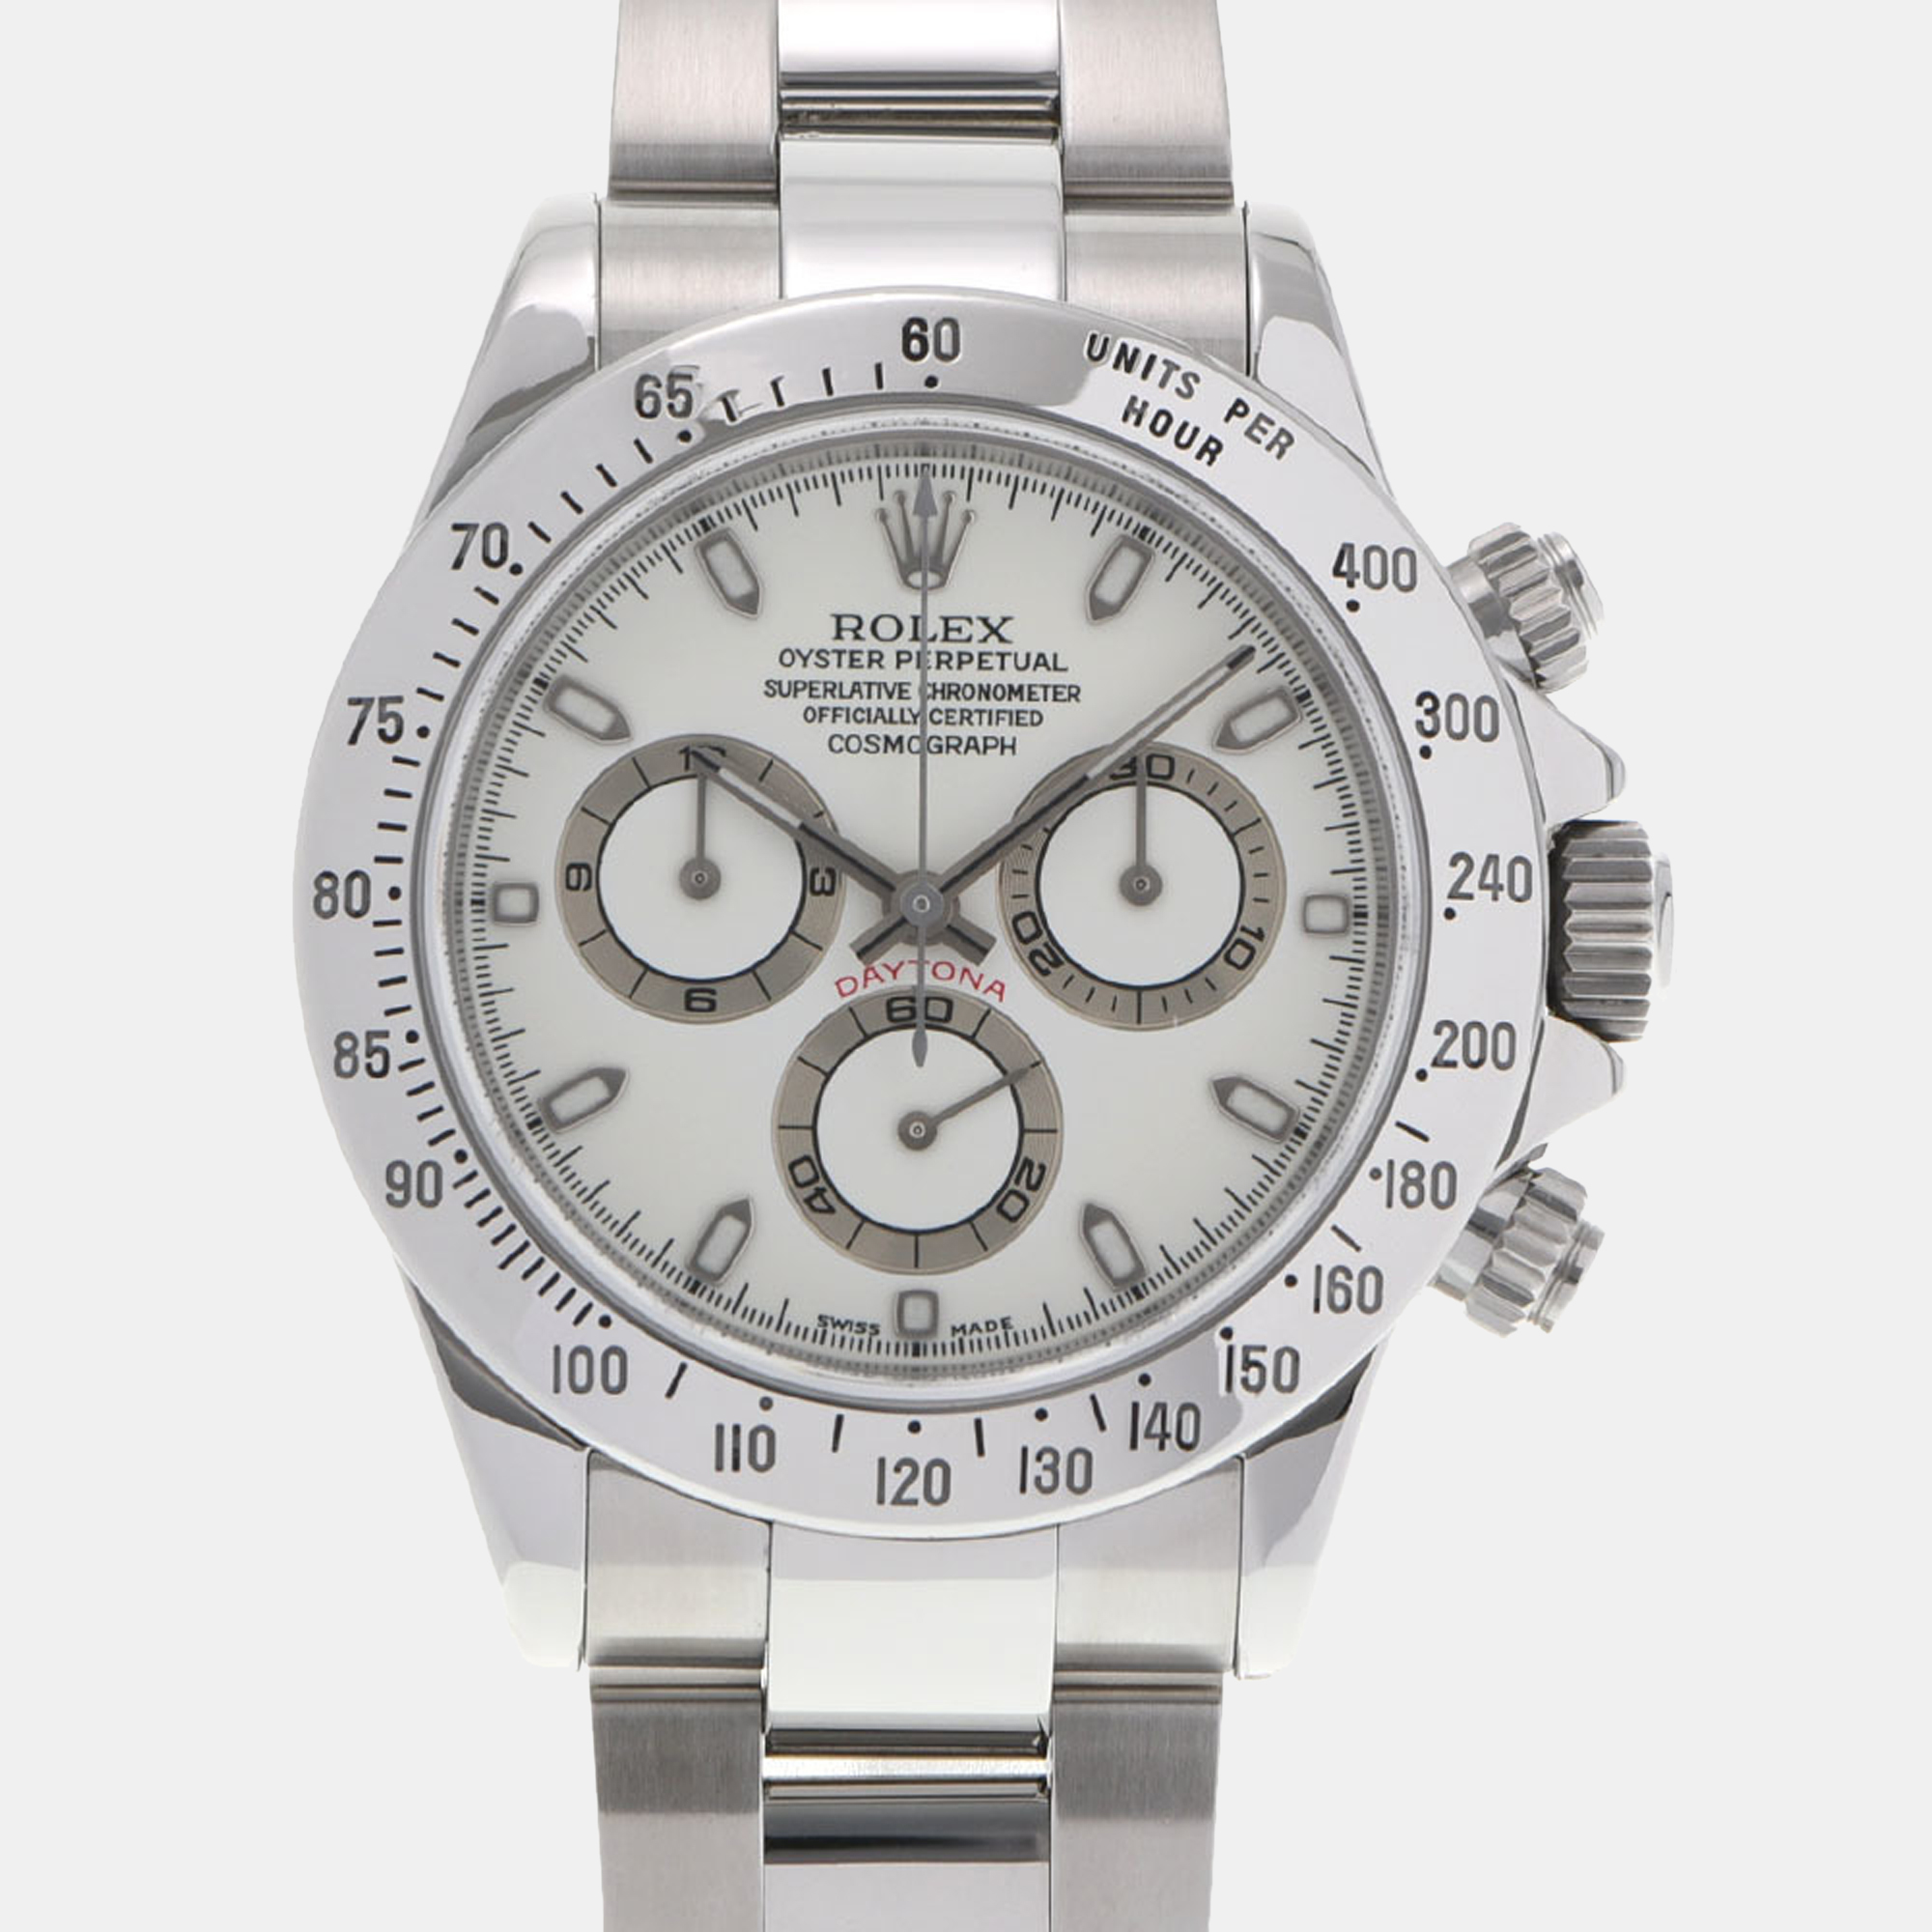 Pre-owned Rolex White Stainless Steel Cosmograph Daytona 116520 Automatic Men's Wristwatch 40 Mm